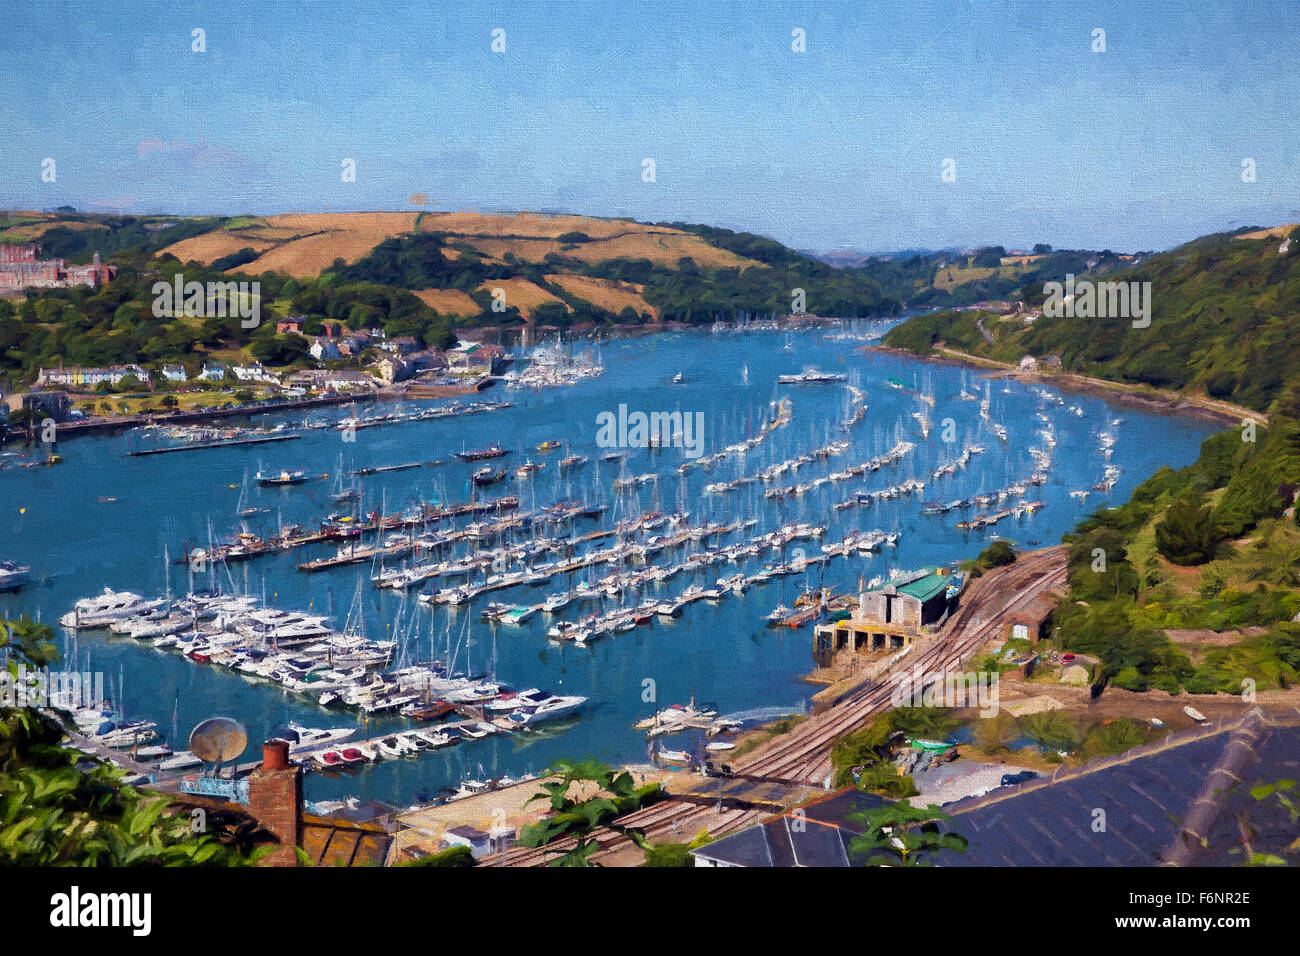 Dartmouth Devon England UK boats and yachts on the river with blue sky in summer illustration like oil painting Stock Photo